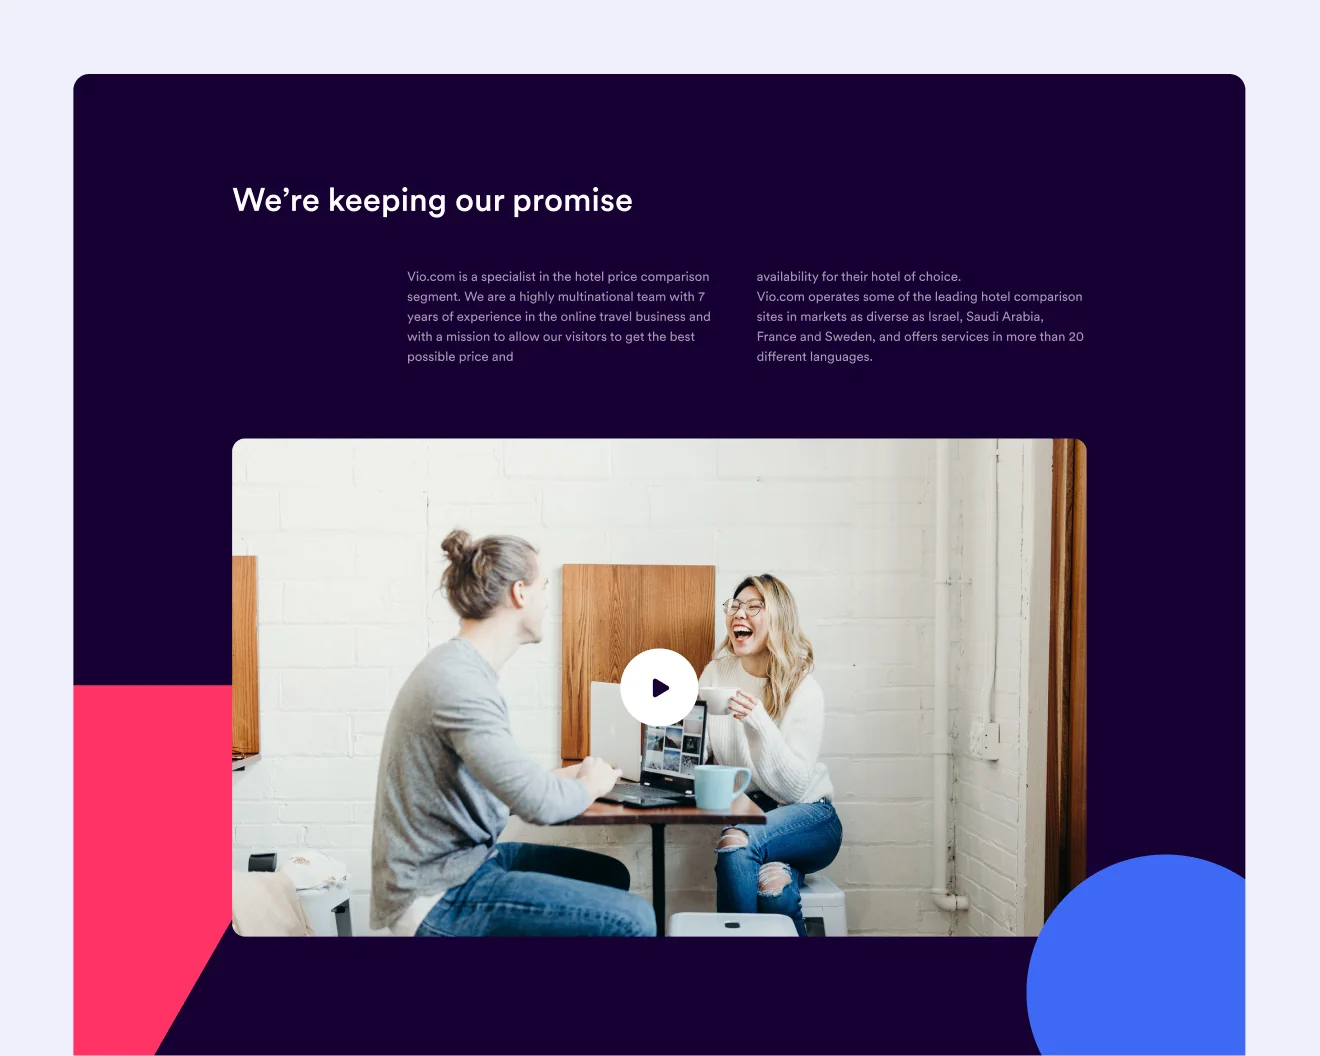 Crop of a web page design that has a predominantly dark purple background with a large heading that says 'We're keeping our promise'. Beneath are two small text columns and a large video still of two people having a joyous conversation.